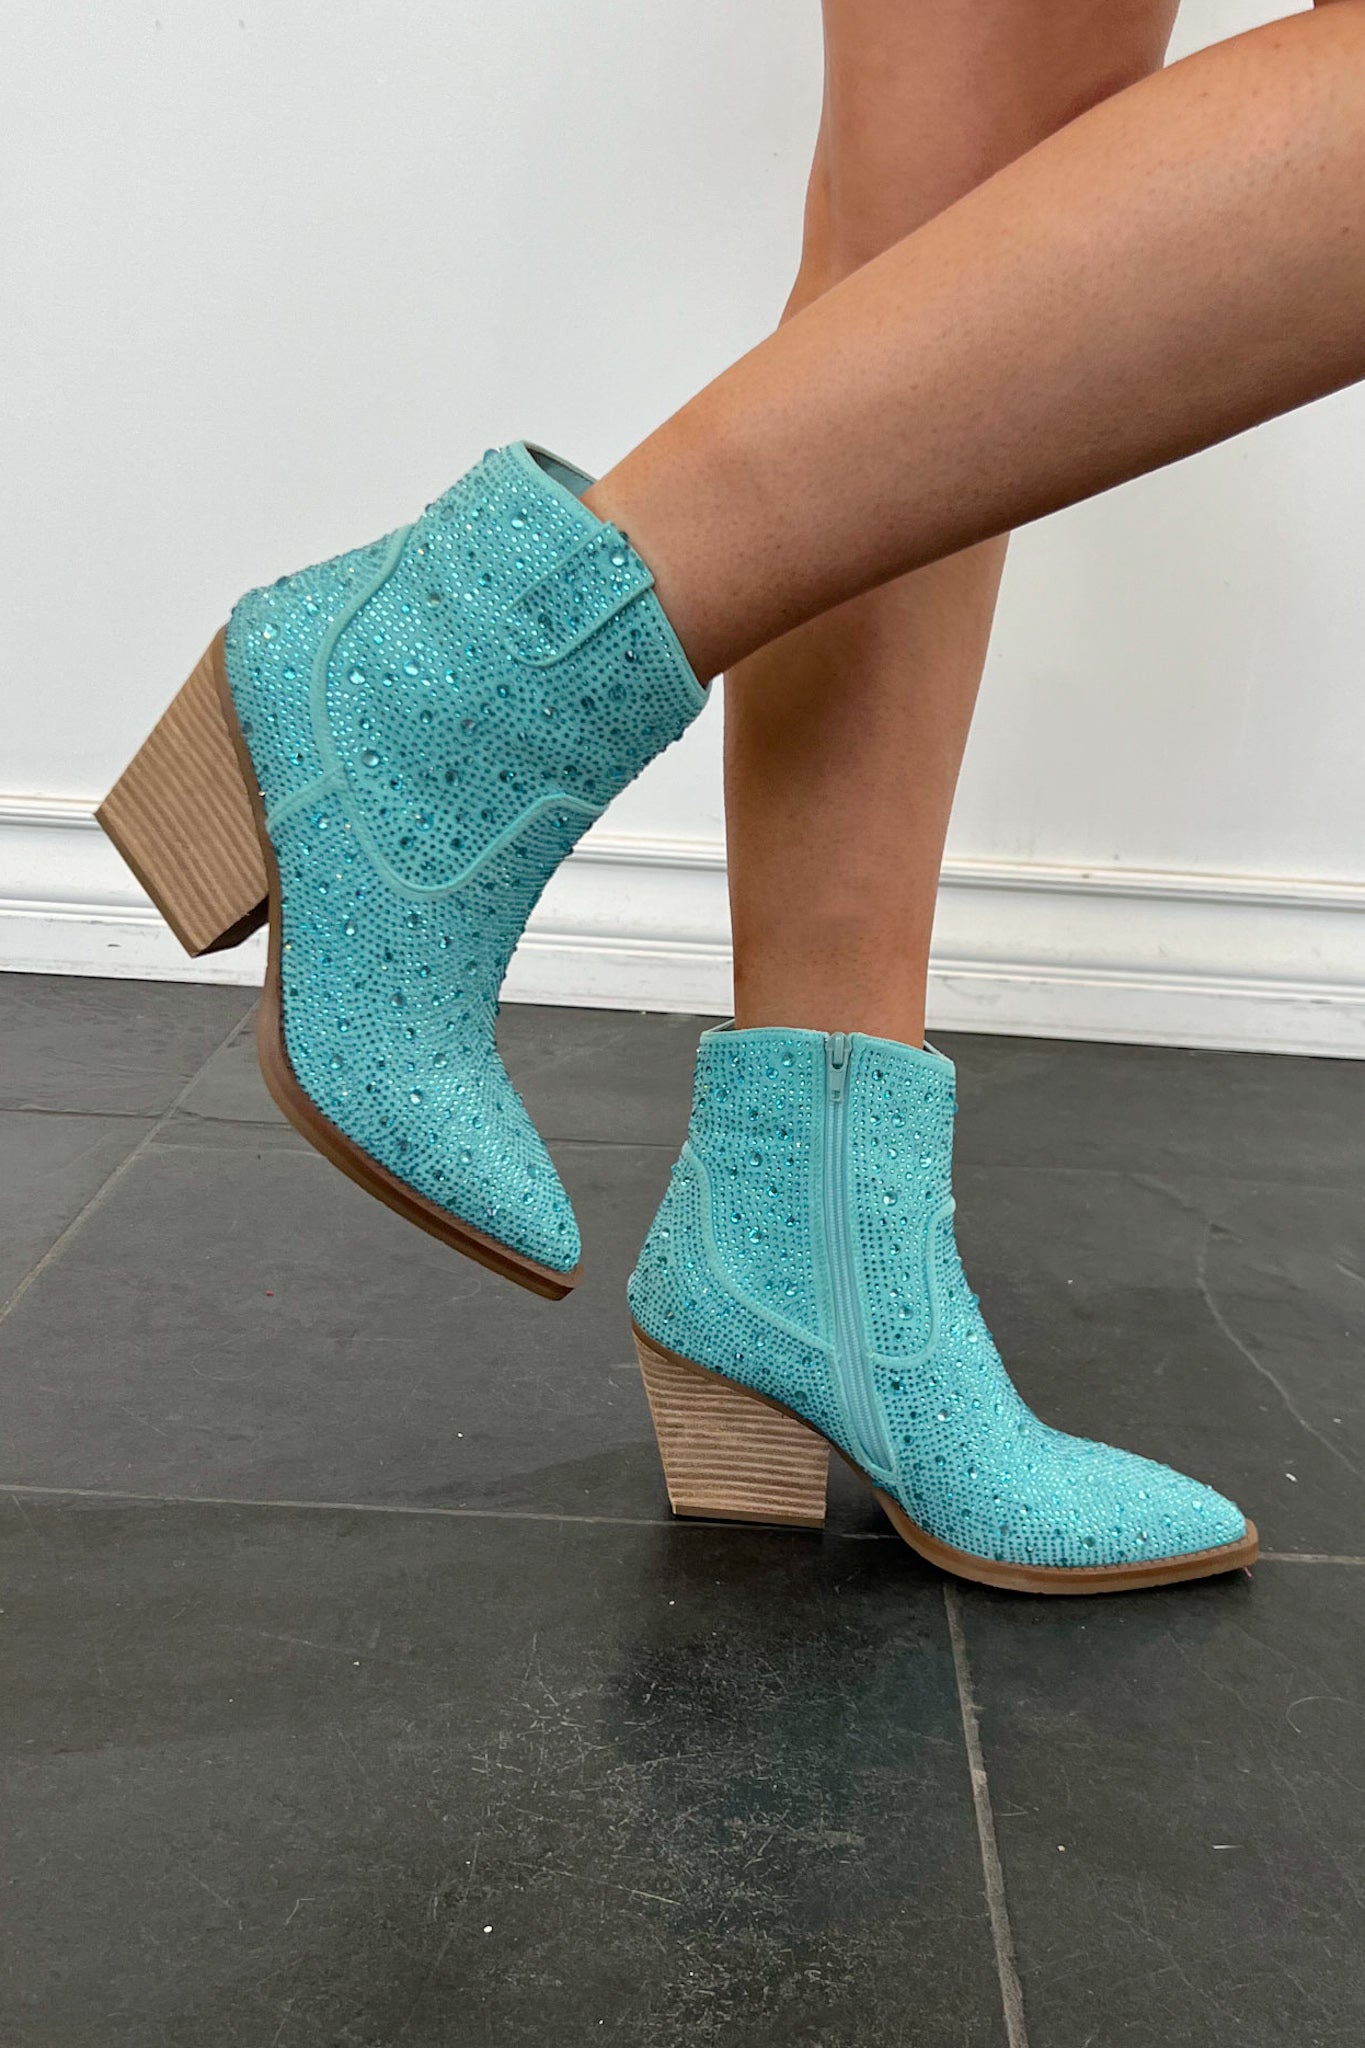 Cinderella's A Cowgirl Bootie-Turquoise